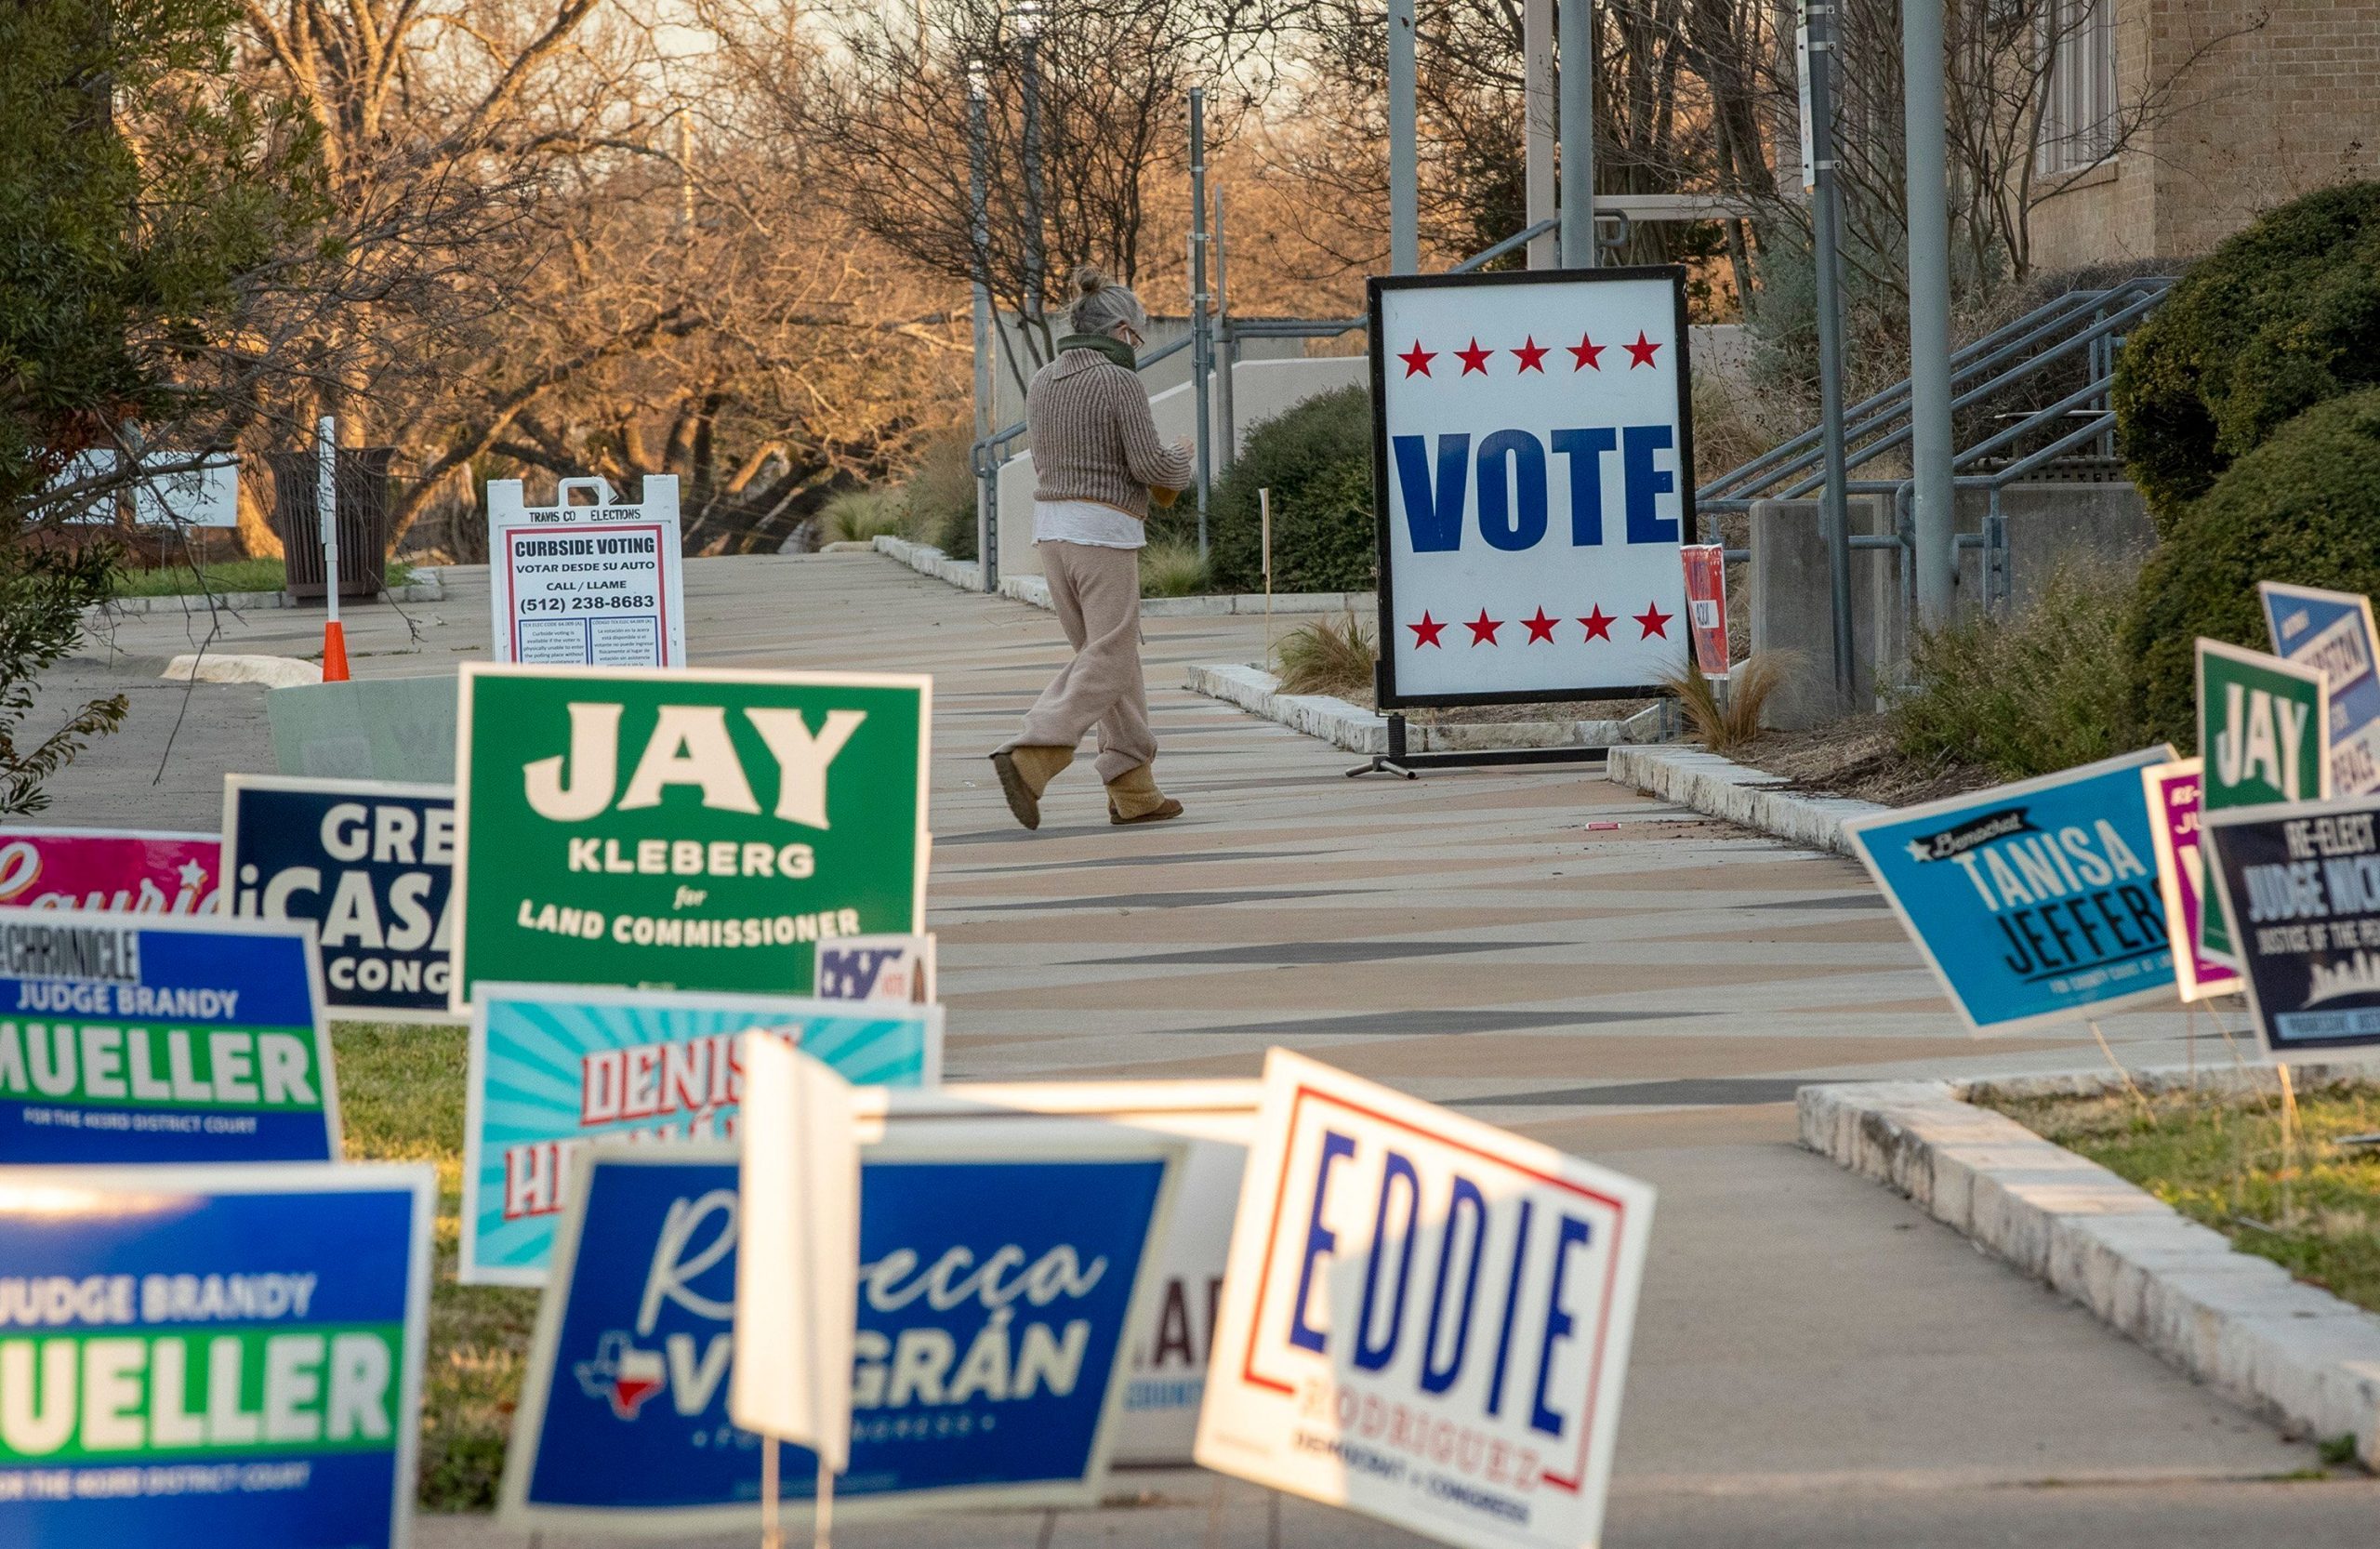 Texas becomes first state to try new restrictive voting laws. What changed?